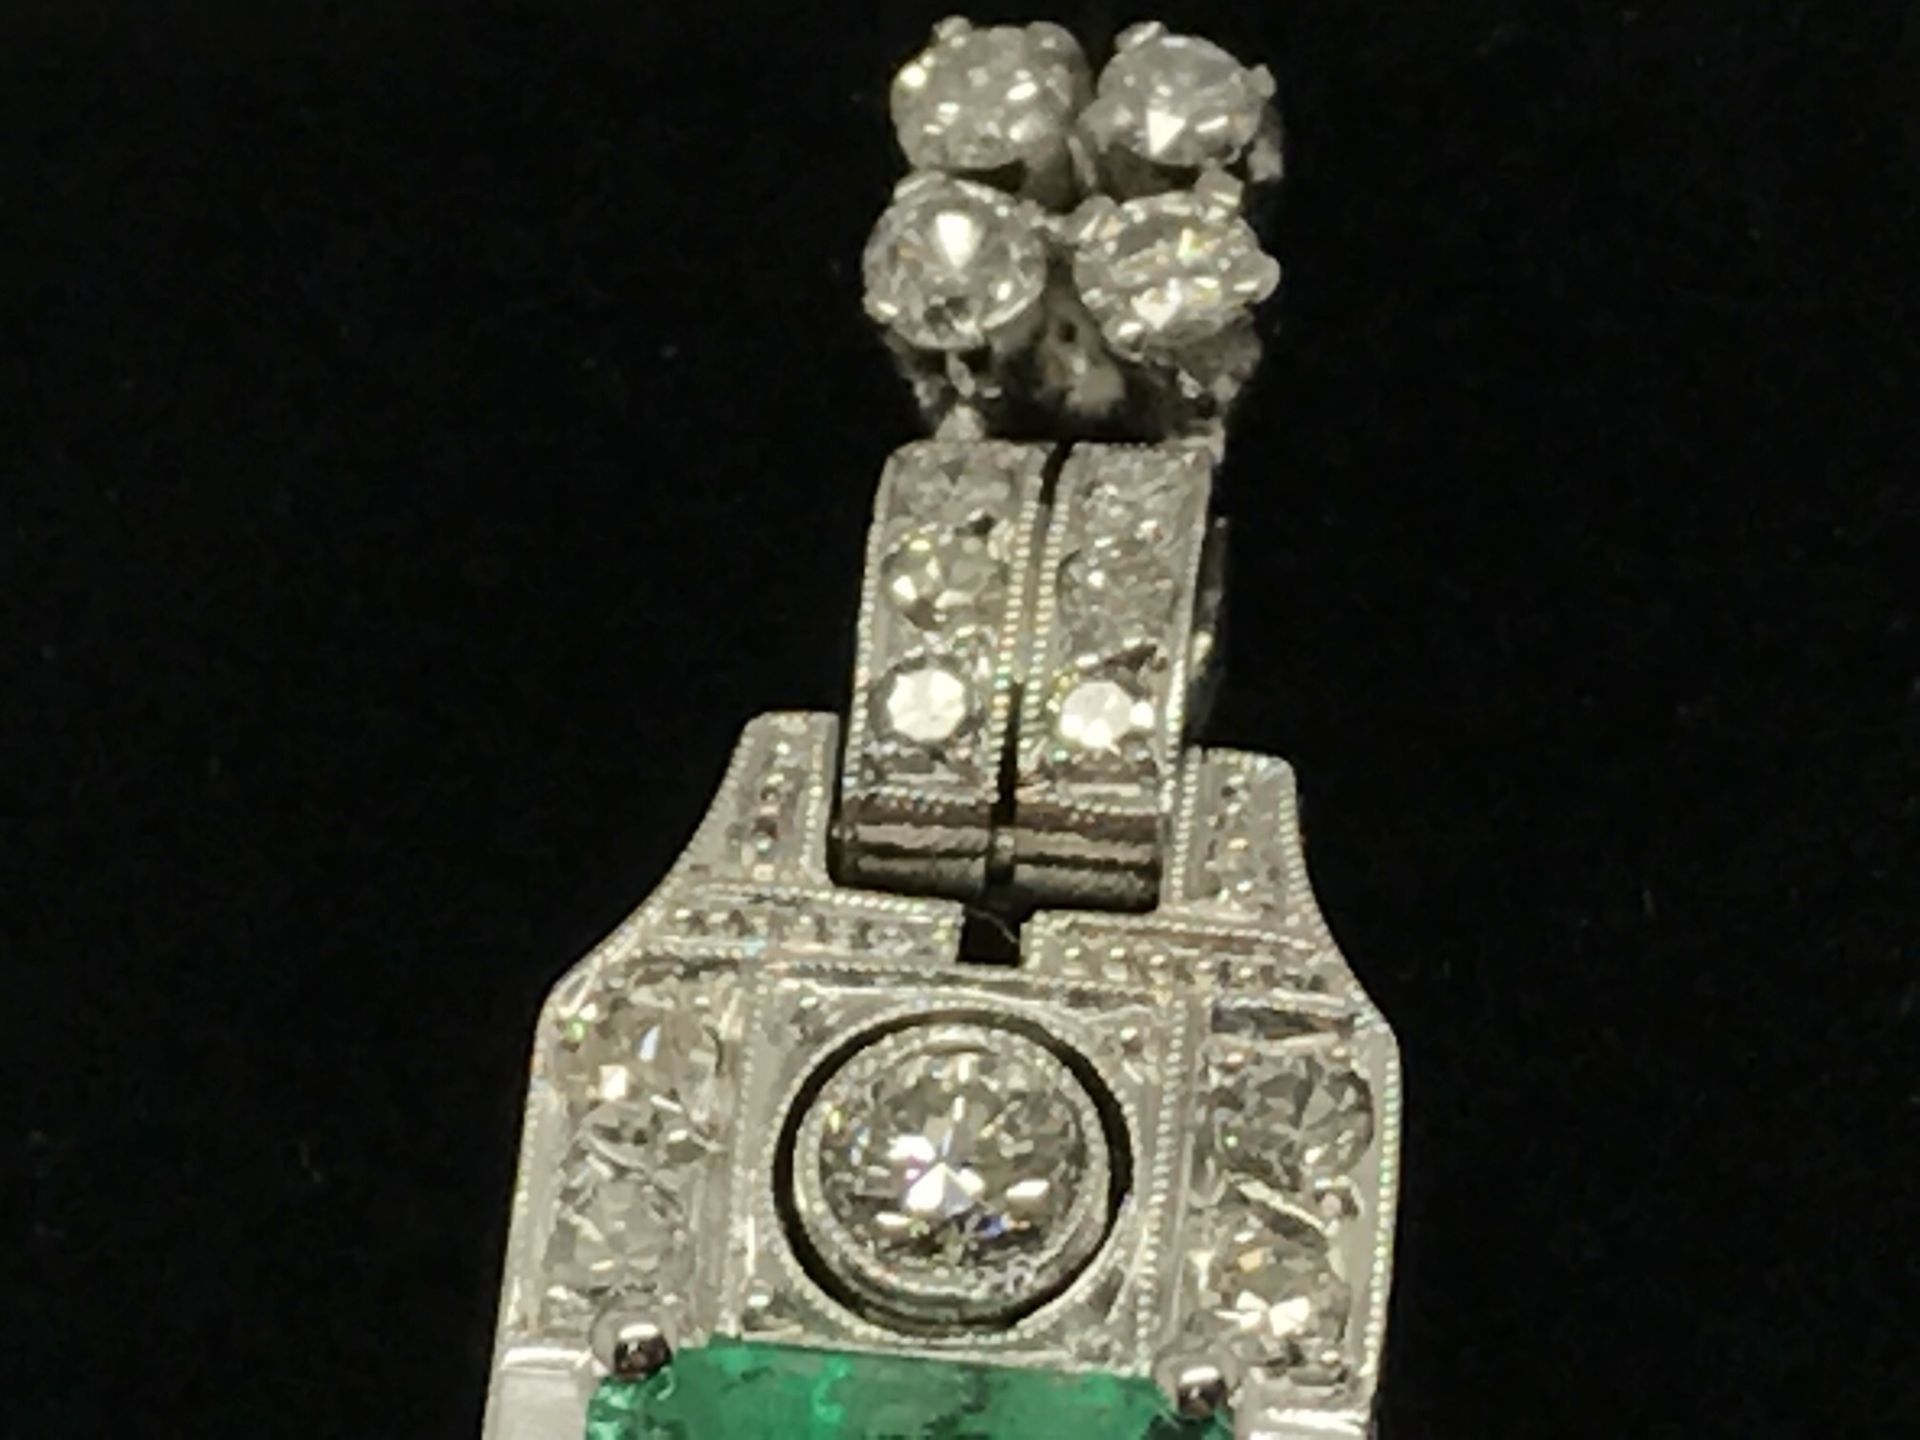 5.50cts COLOMBIAN EMERALD & DIAMOND EARRINGS SET IN WHITE METAL TESTED AS PLATINUM - Image 4 of 7